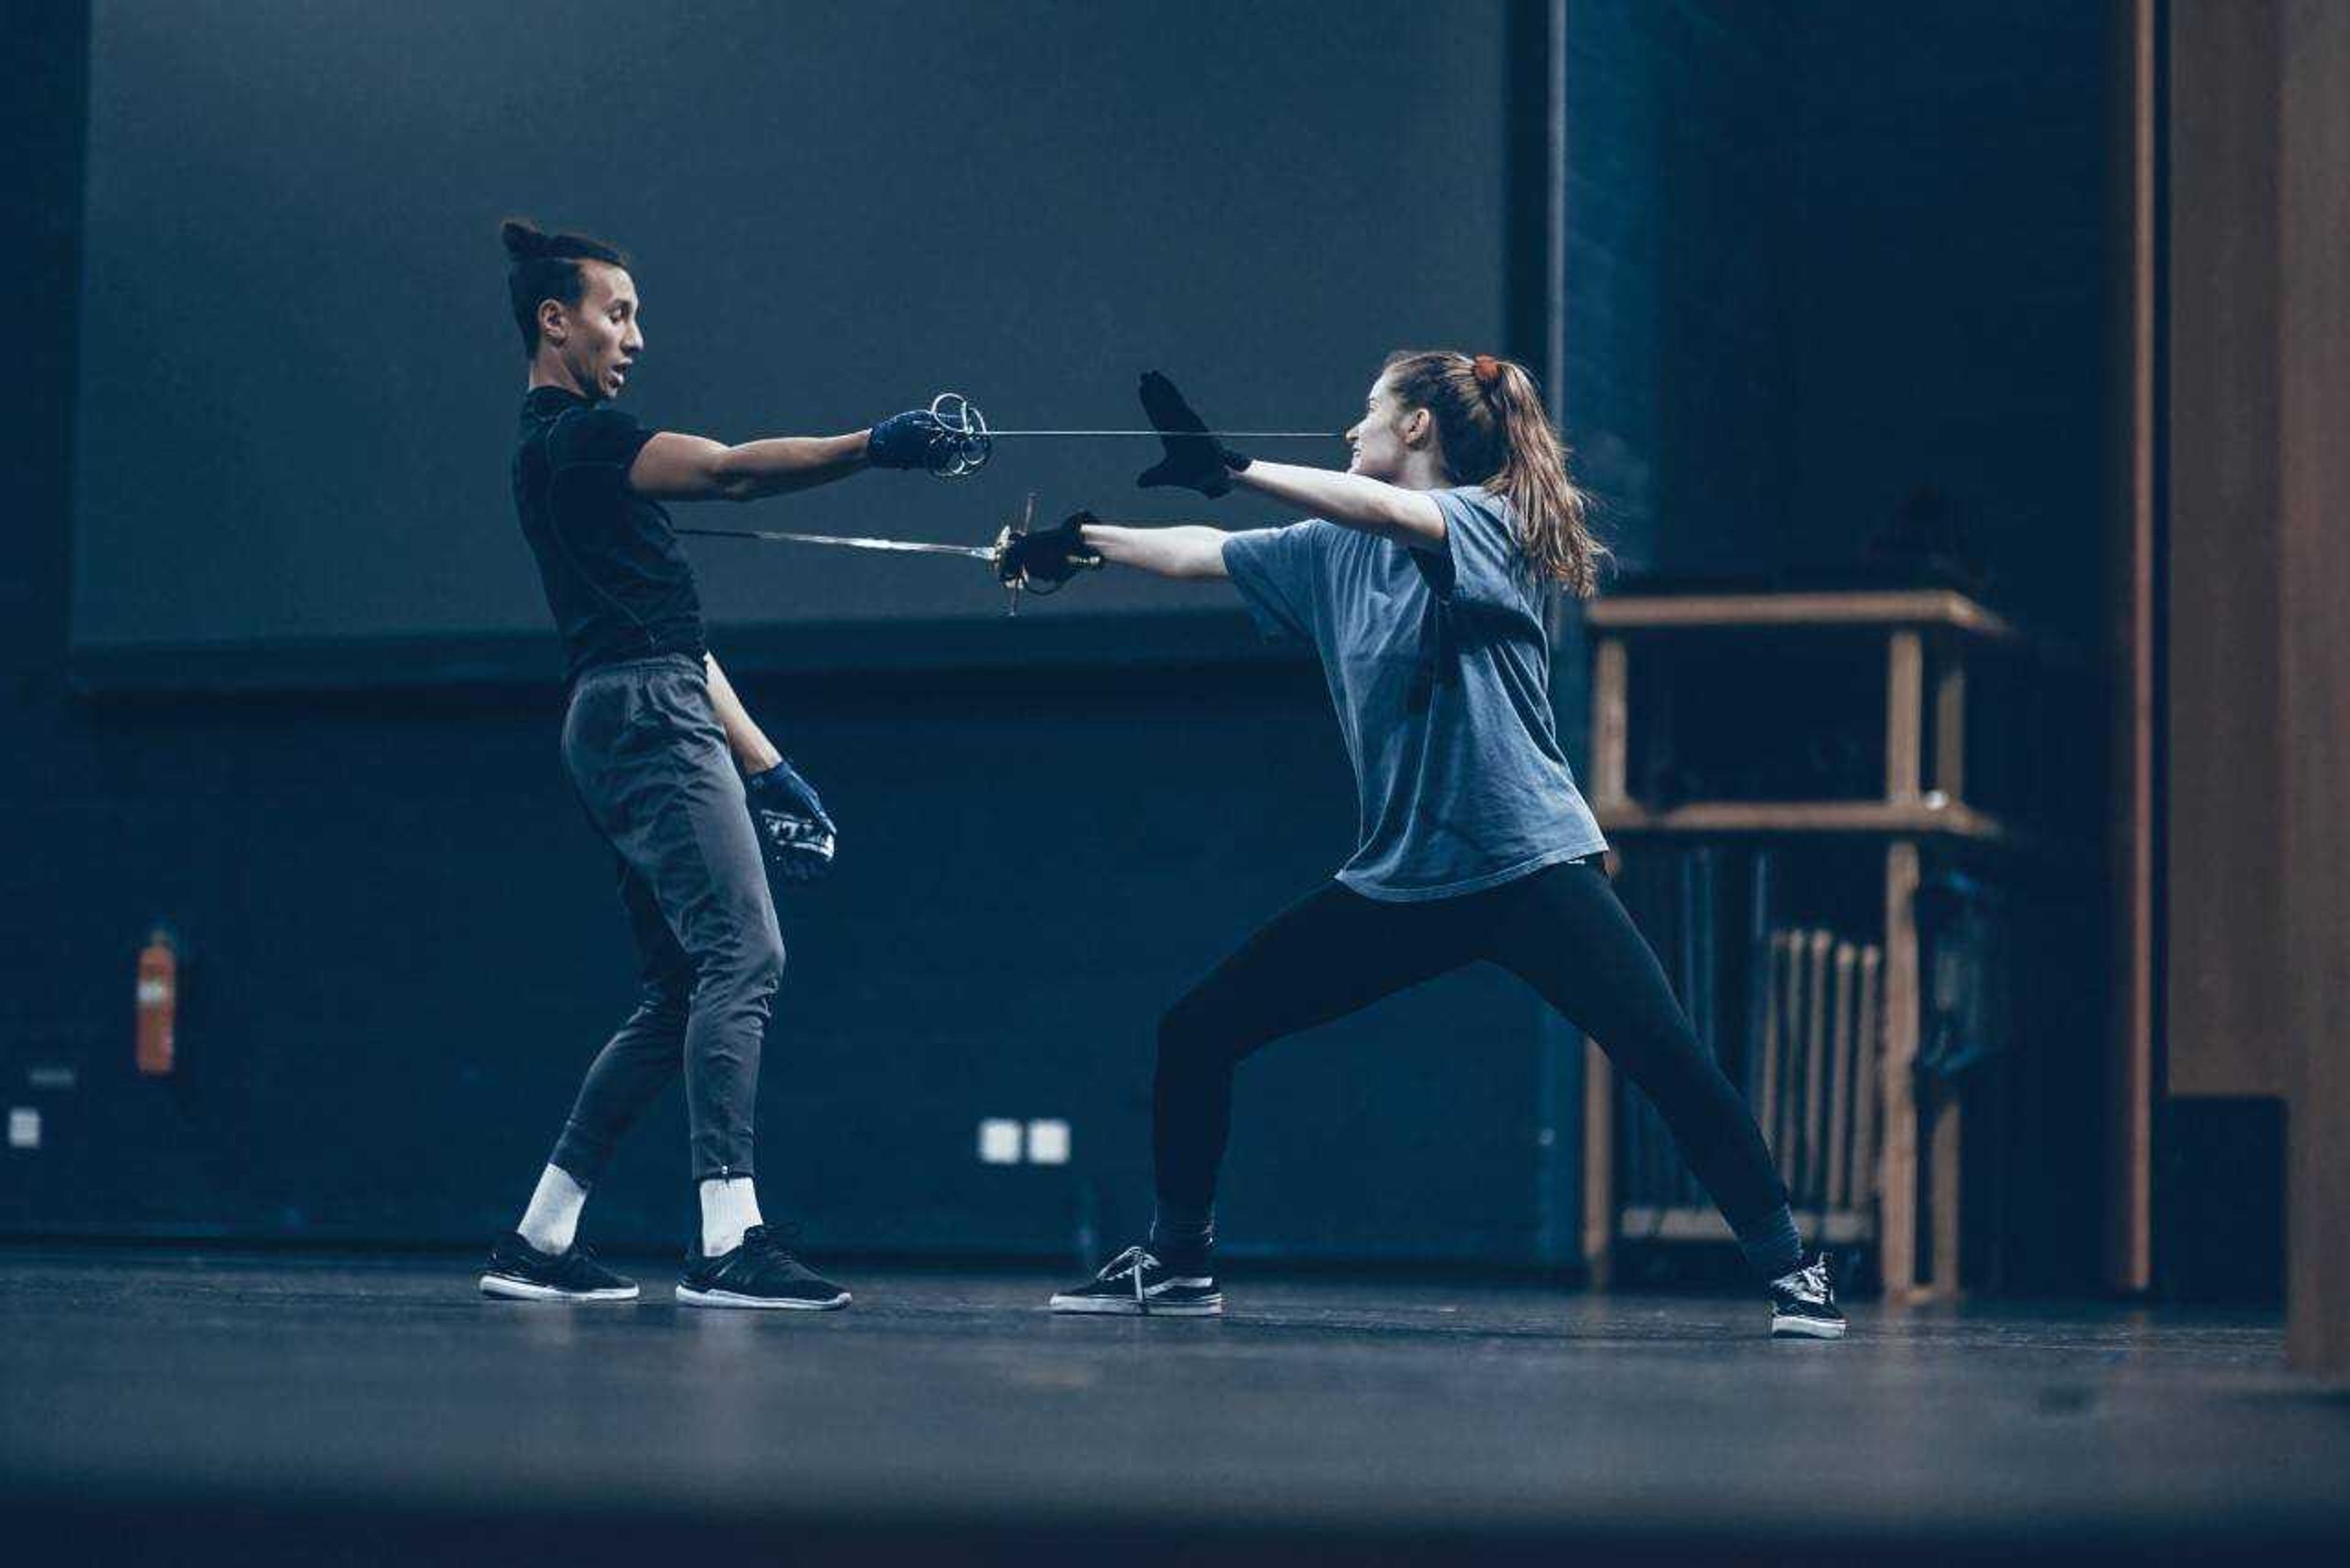 Corie Williams (left) and Alex Burke (right) perform a combat scene during the Dueling Arts International Workshop.